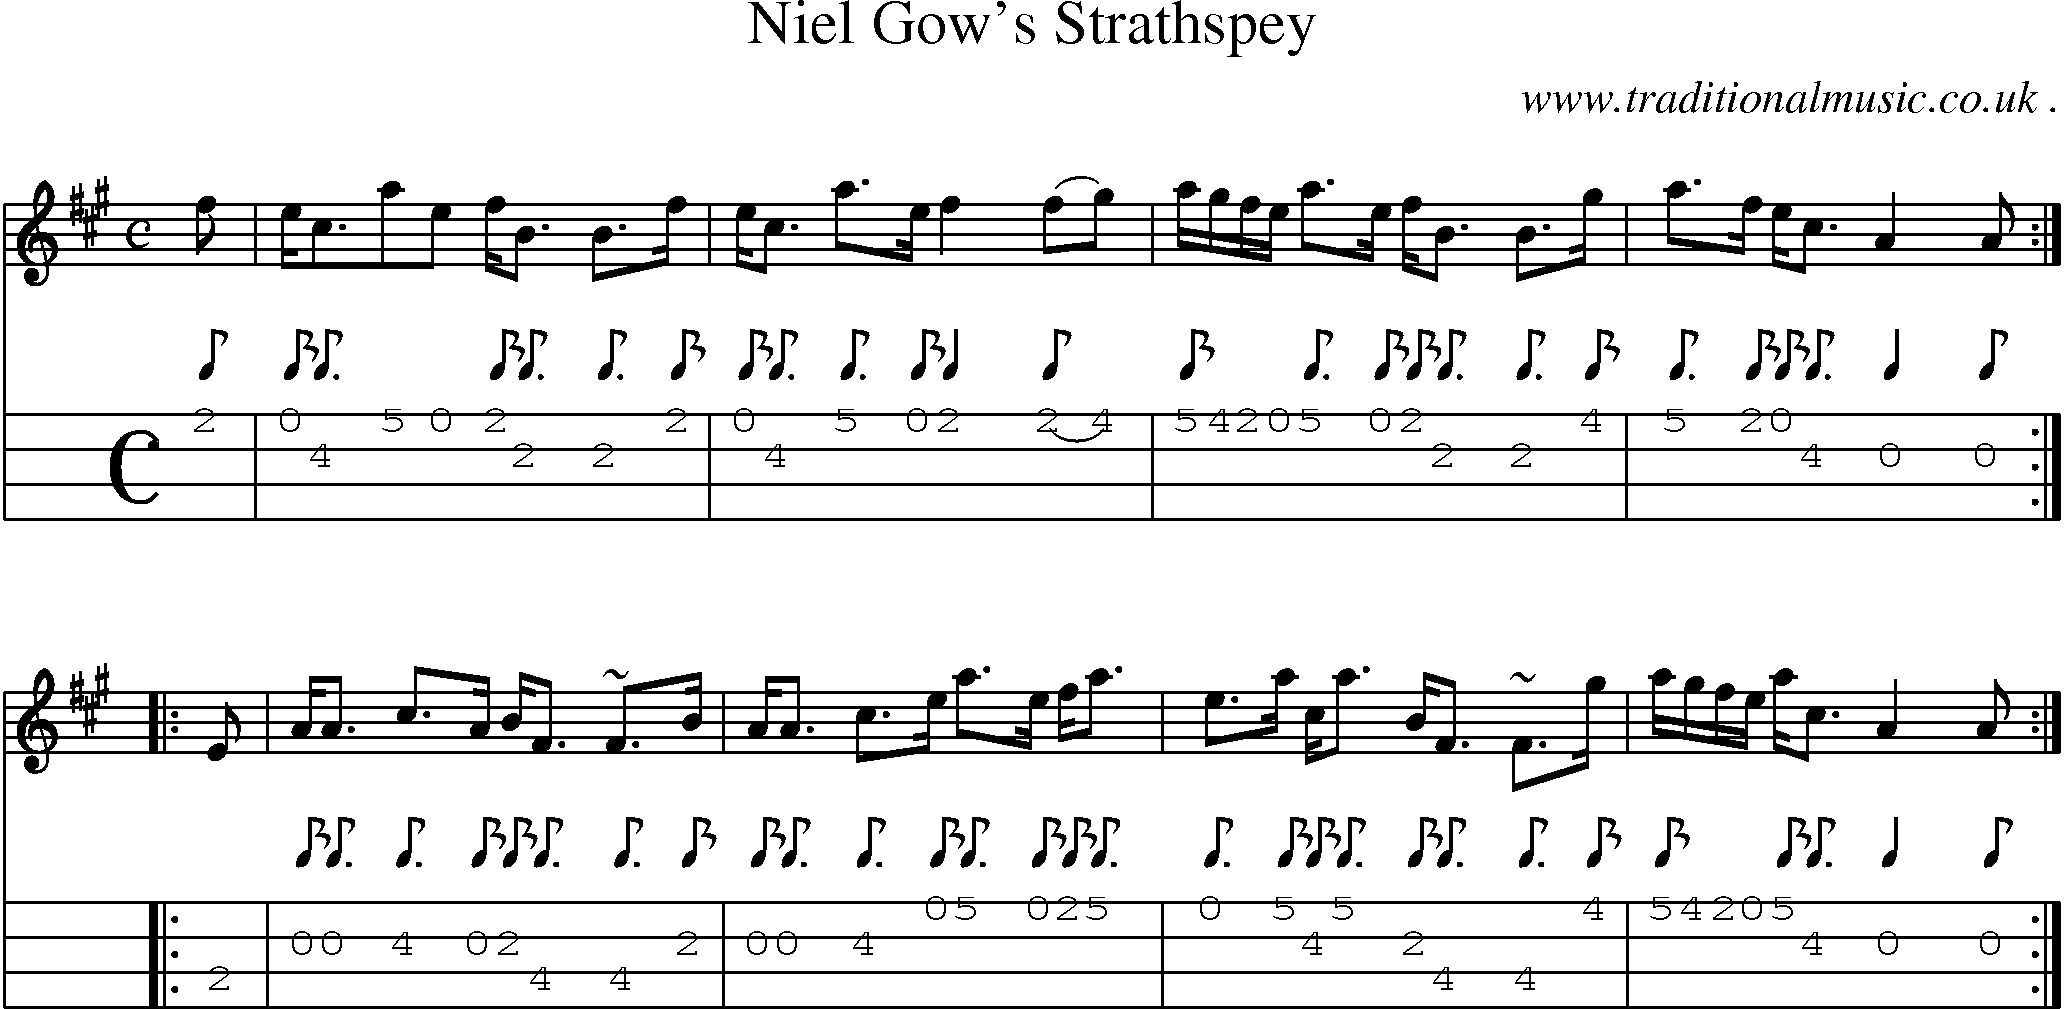 Sheet-music  score, Chords and Mandolin Tabs for Niel Gows Strathspey